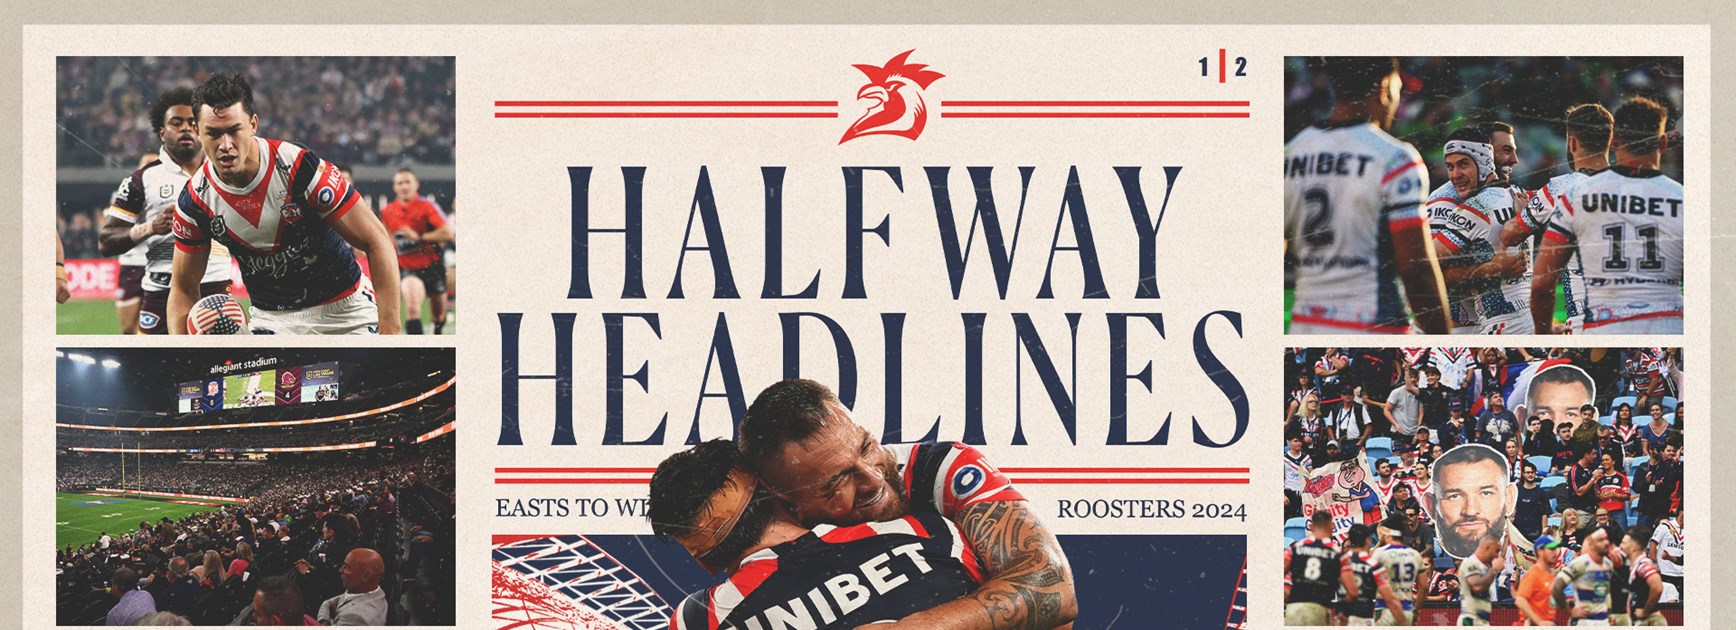 Halfway Headlines: The Best Moments of 2024 So Far